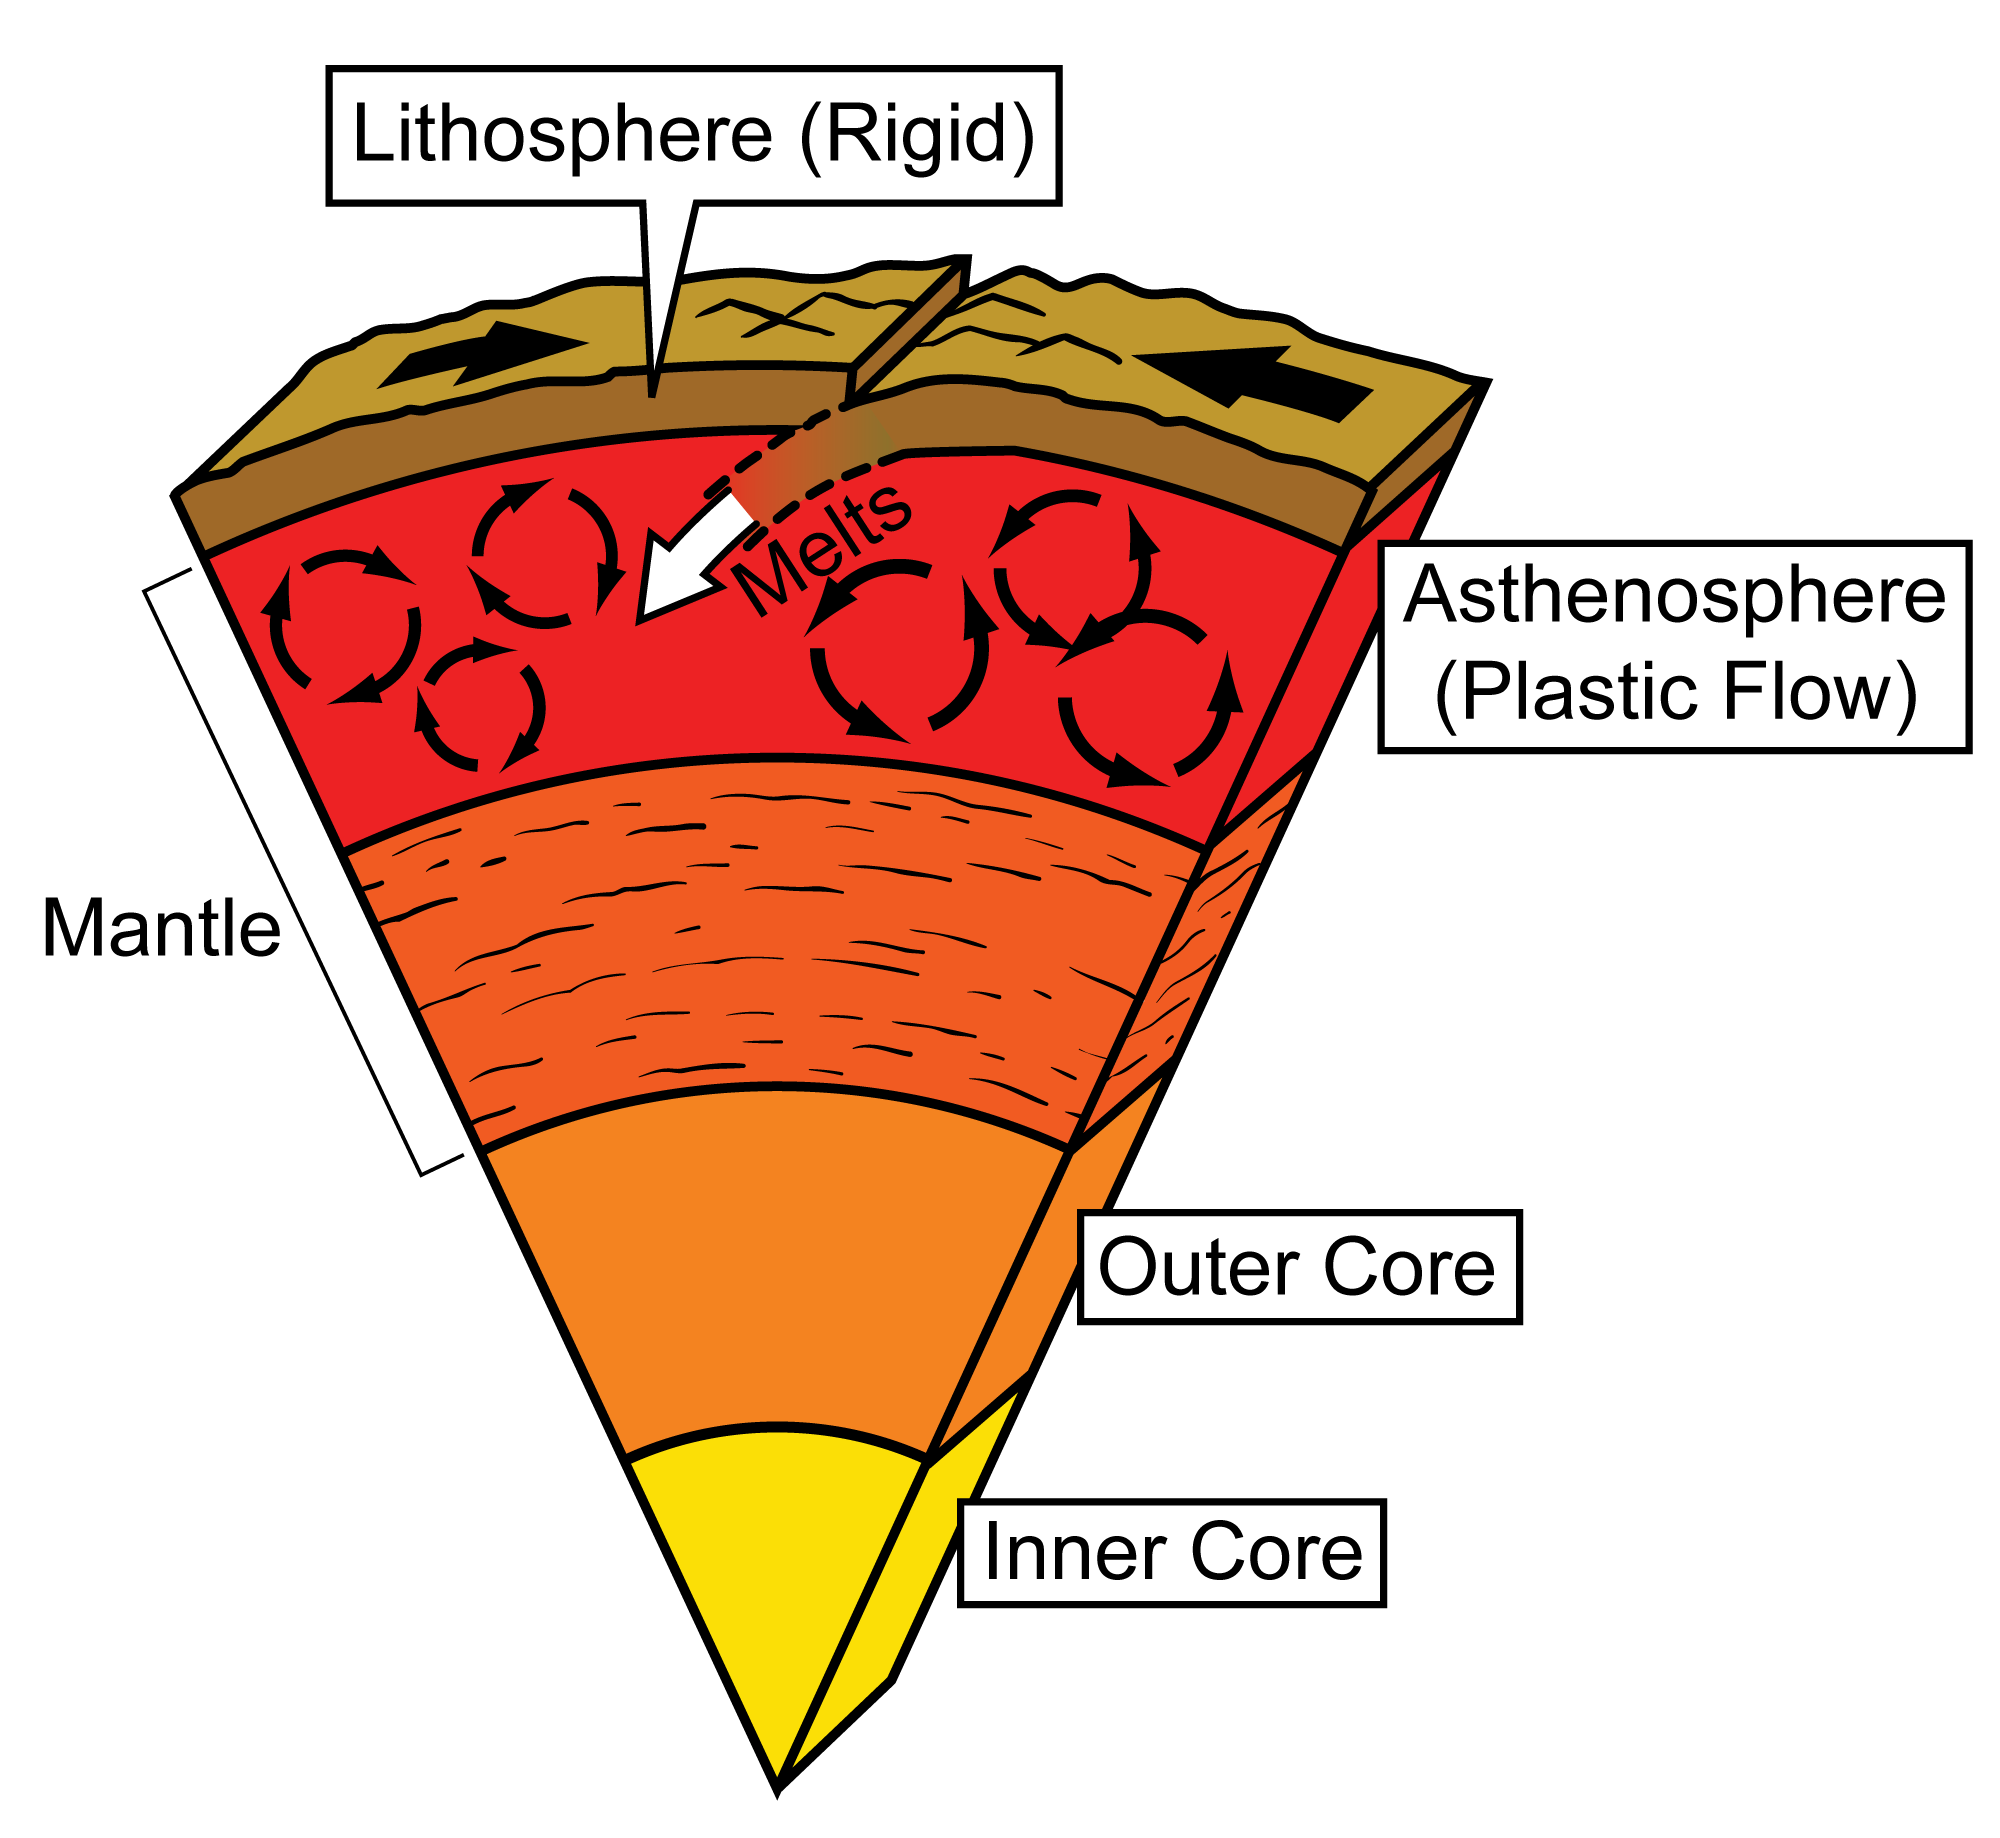 A diagram showing a cross-section of the earth from center to surface. From middle to outside, the layers shown are the inner core, the outer core, the mantle, and the lithosphere. The outer layer of the mantle is the athsenophere.